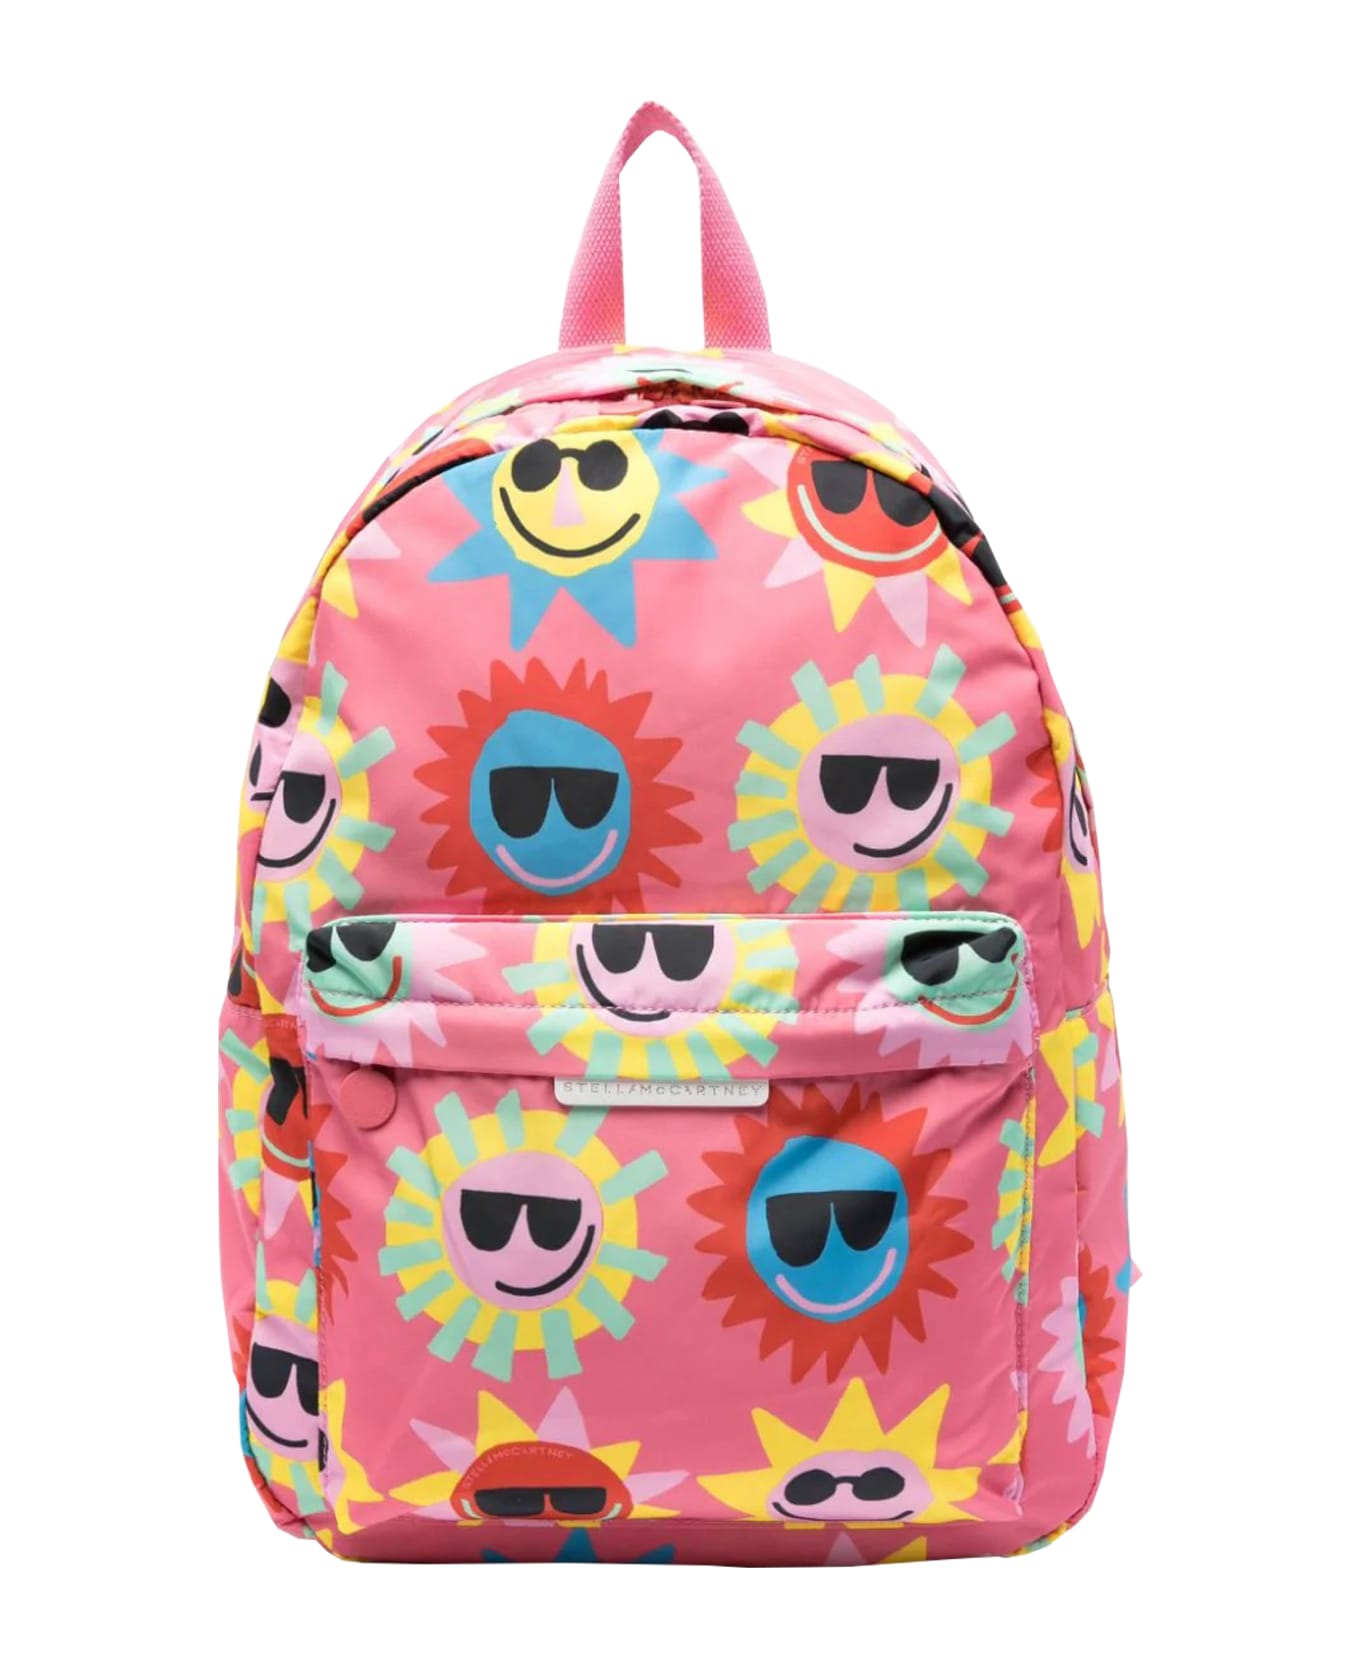 Stella McCartney Kids Backpack With Print - Multicolor アクセサリー＆ギフト